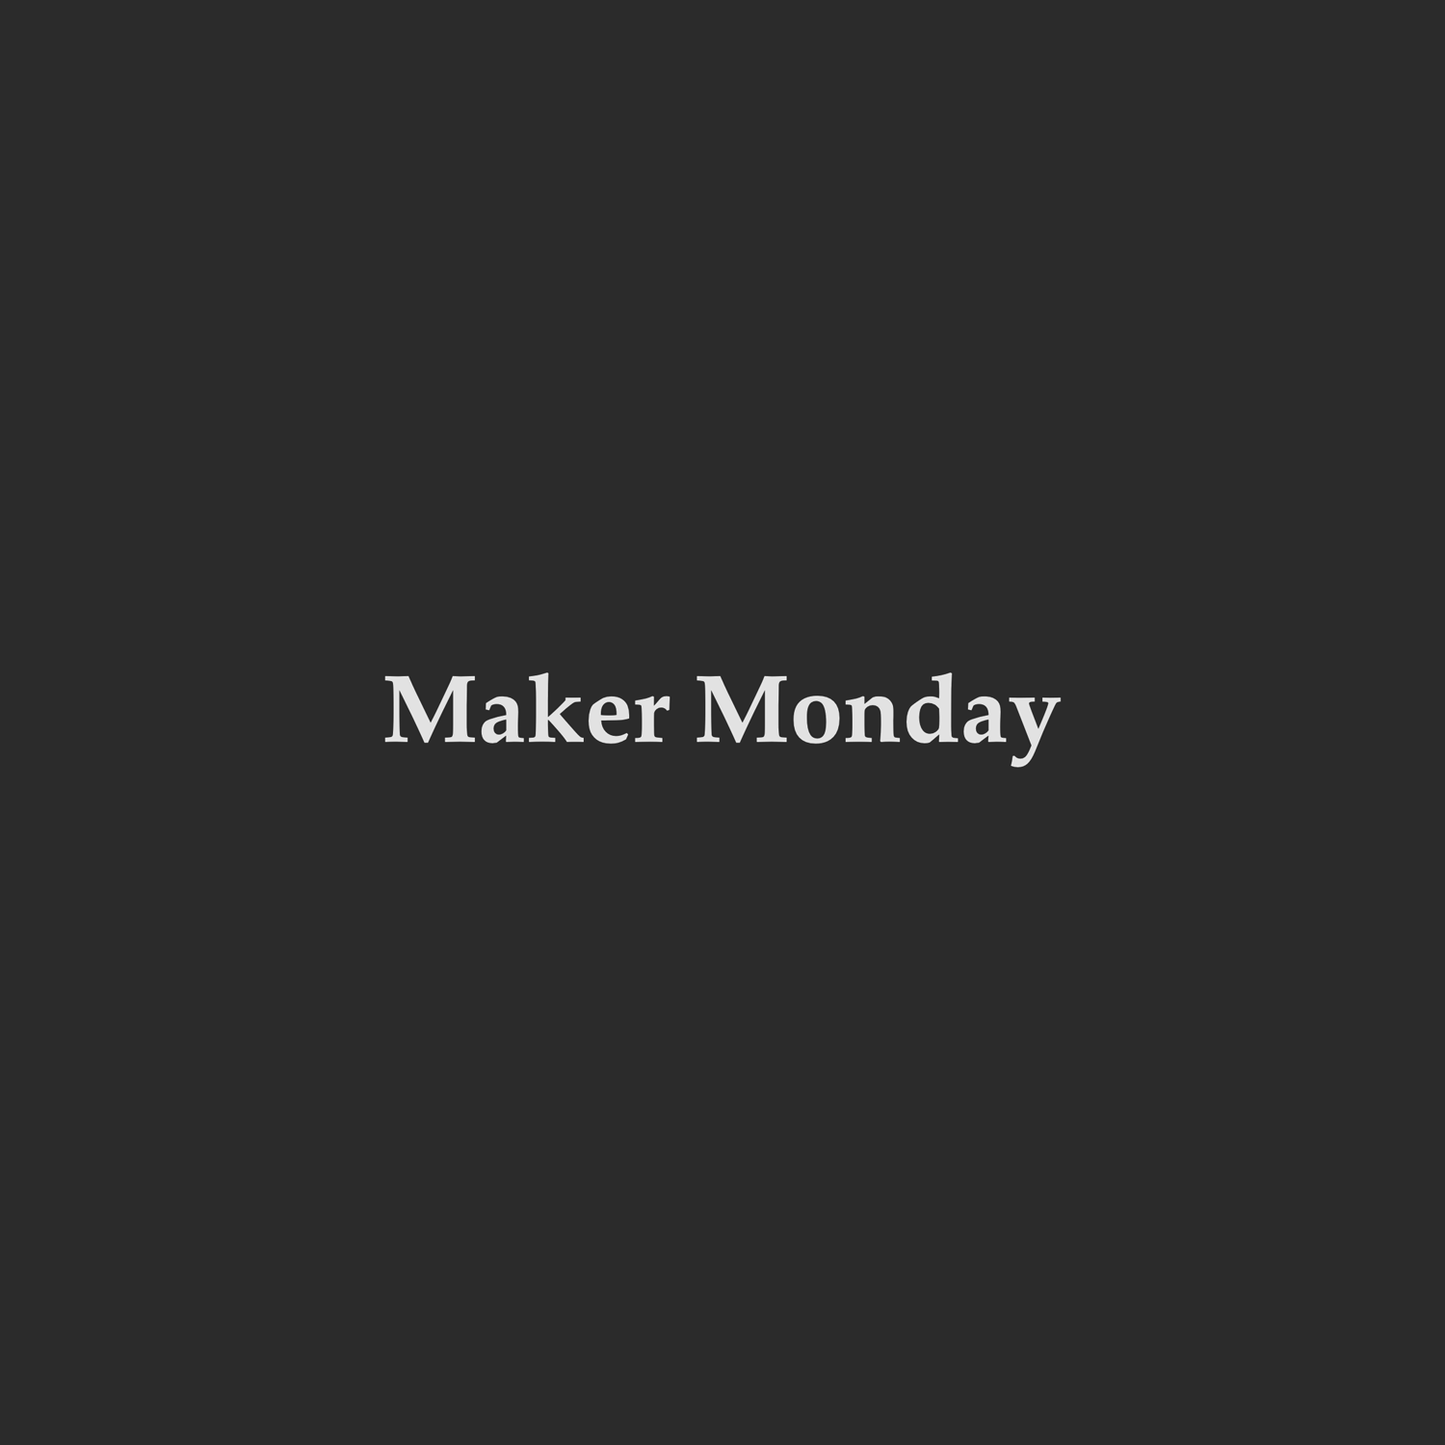 Join The Maker Monday Email List